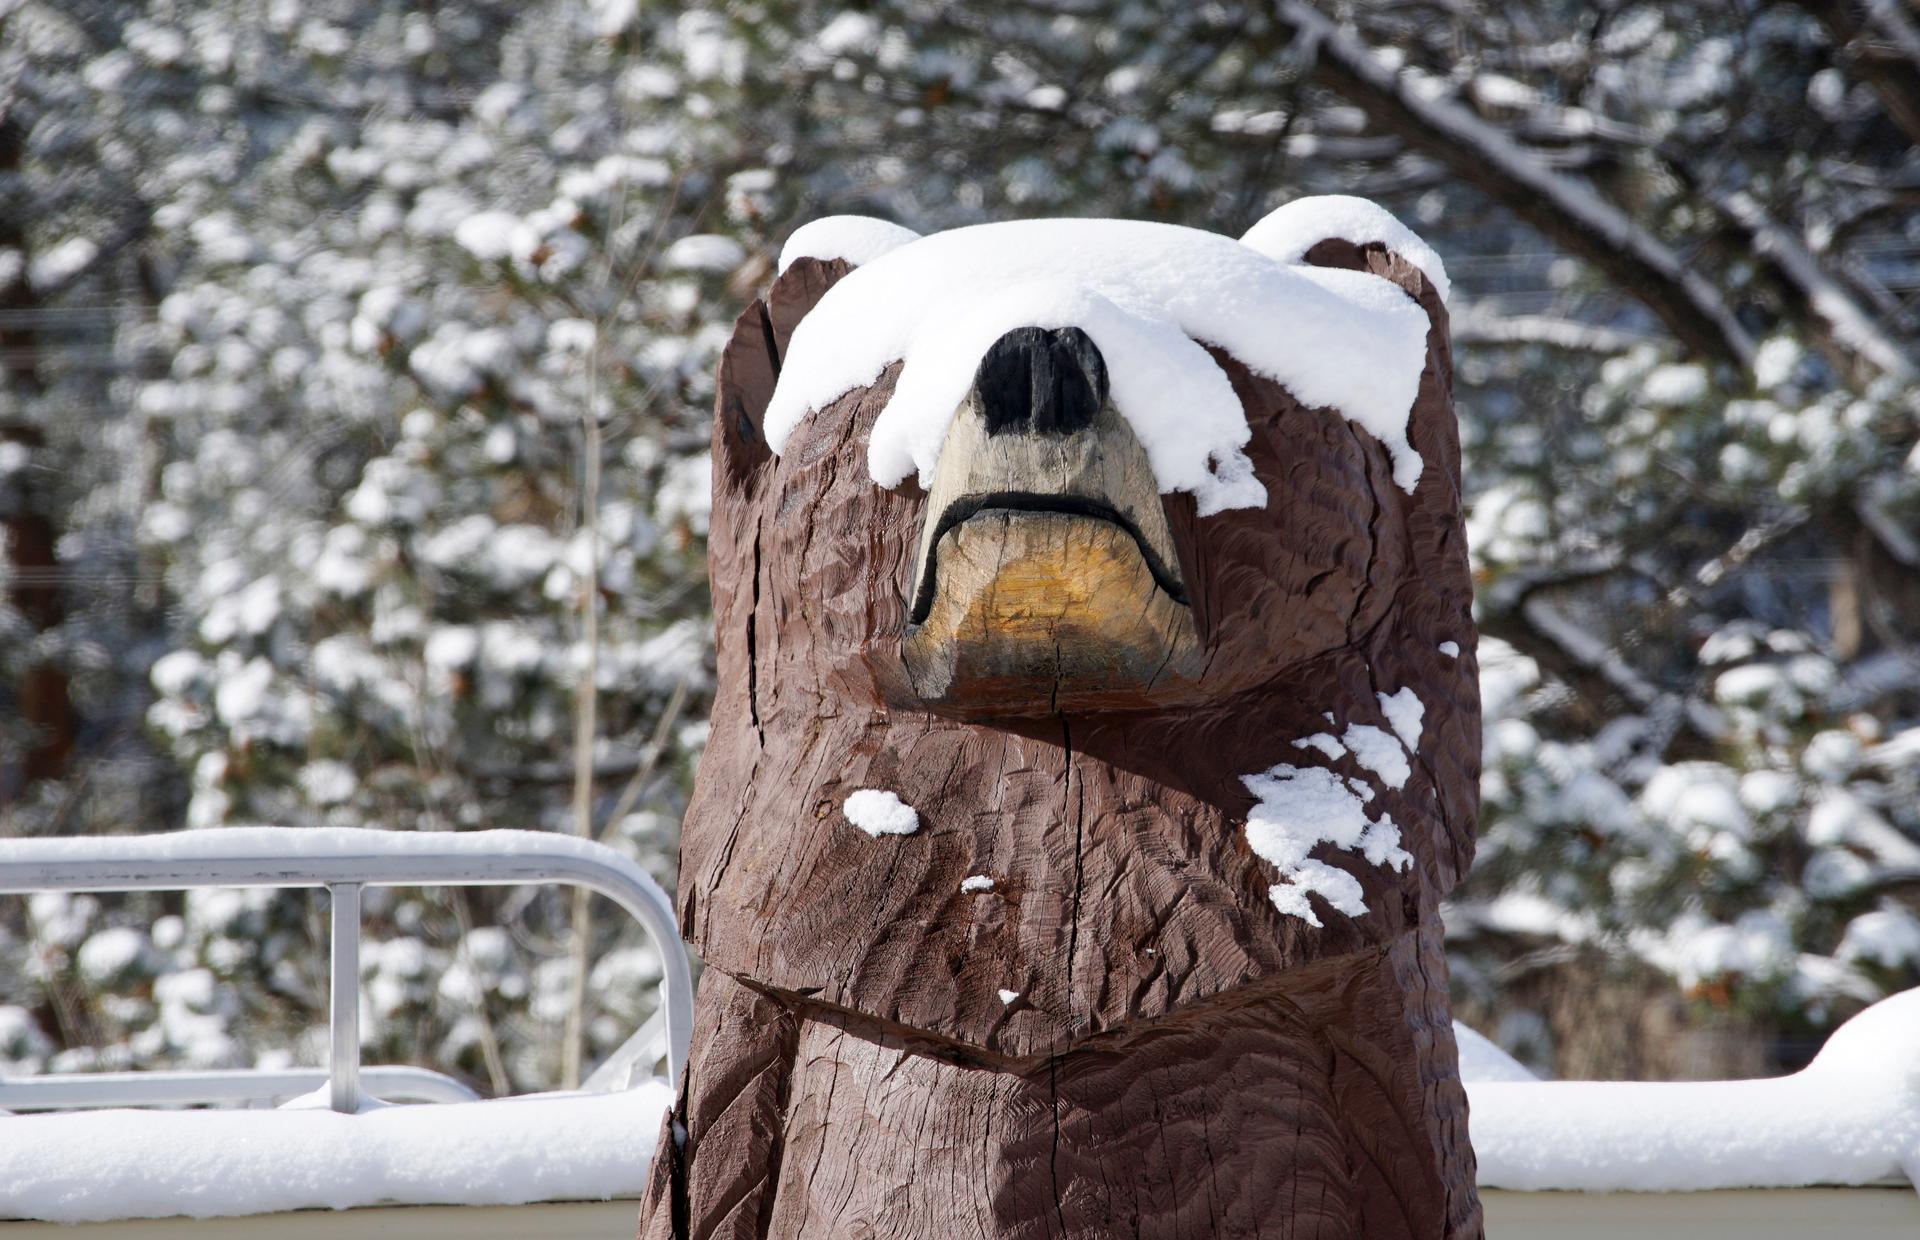 The face of a carved wooden bear